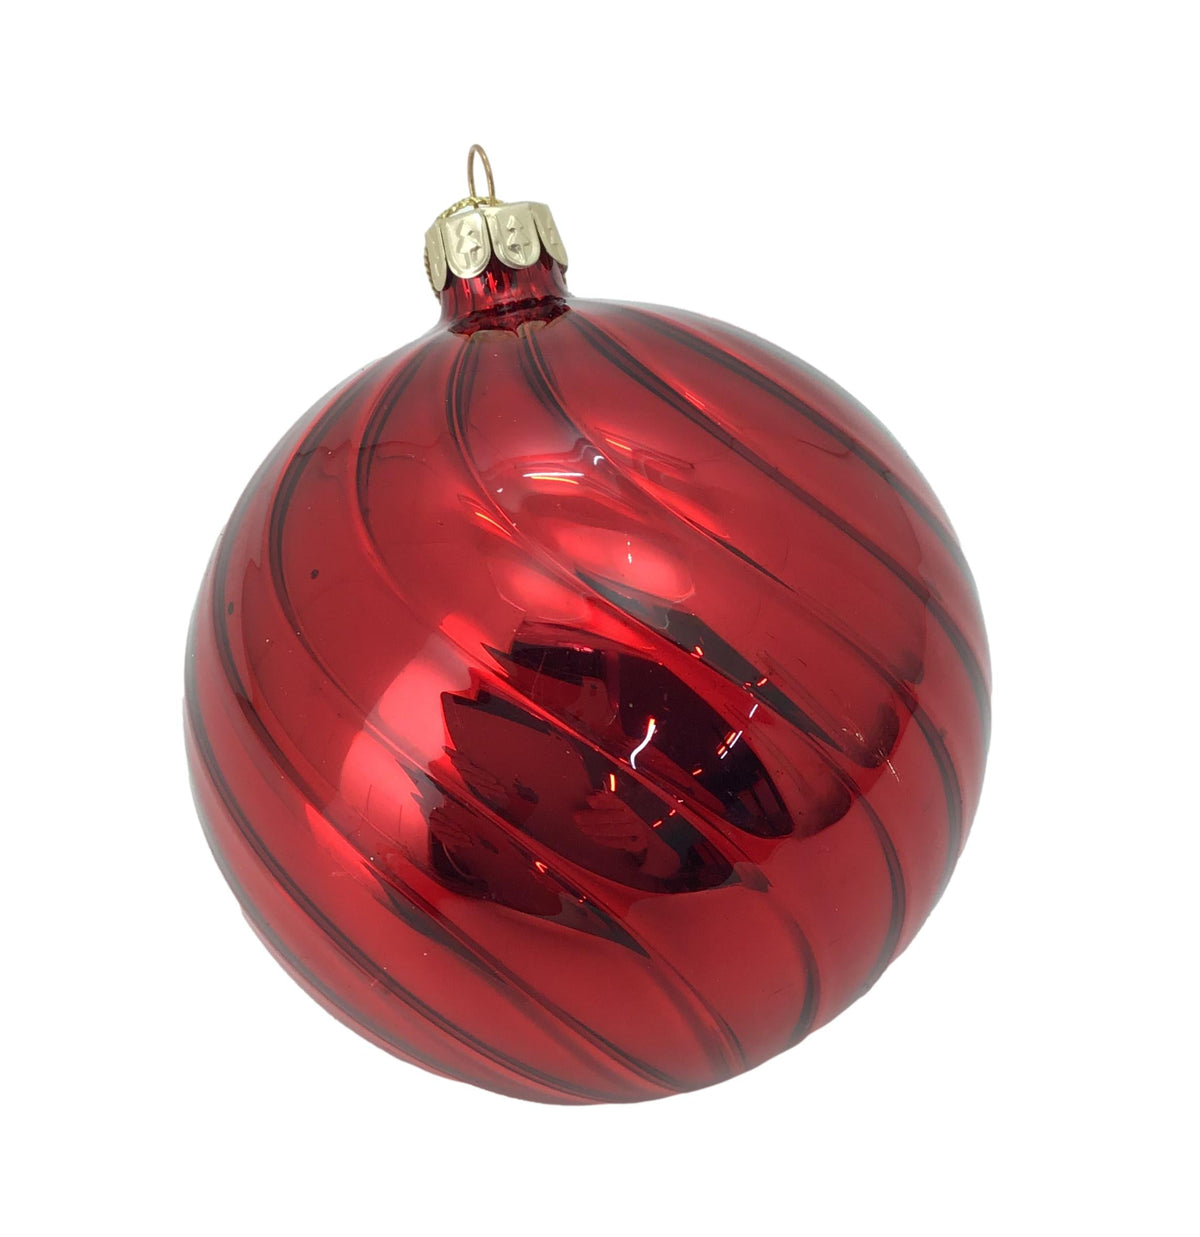 Red Shiny Ornament - My Christmas